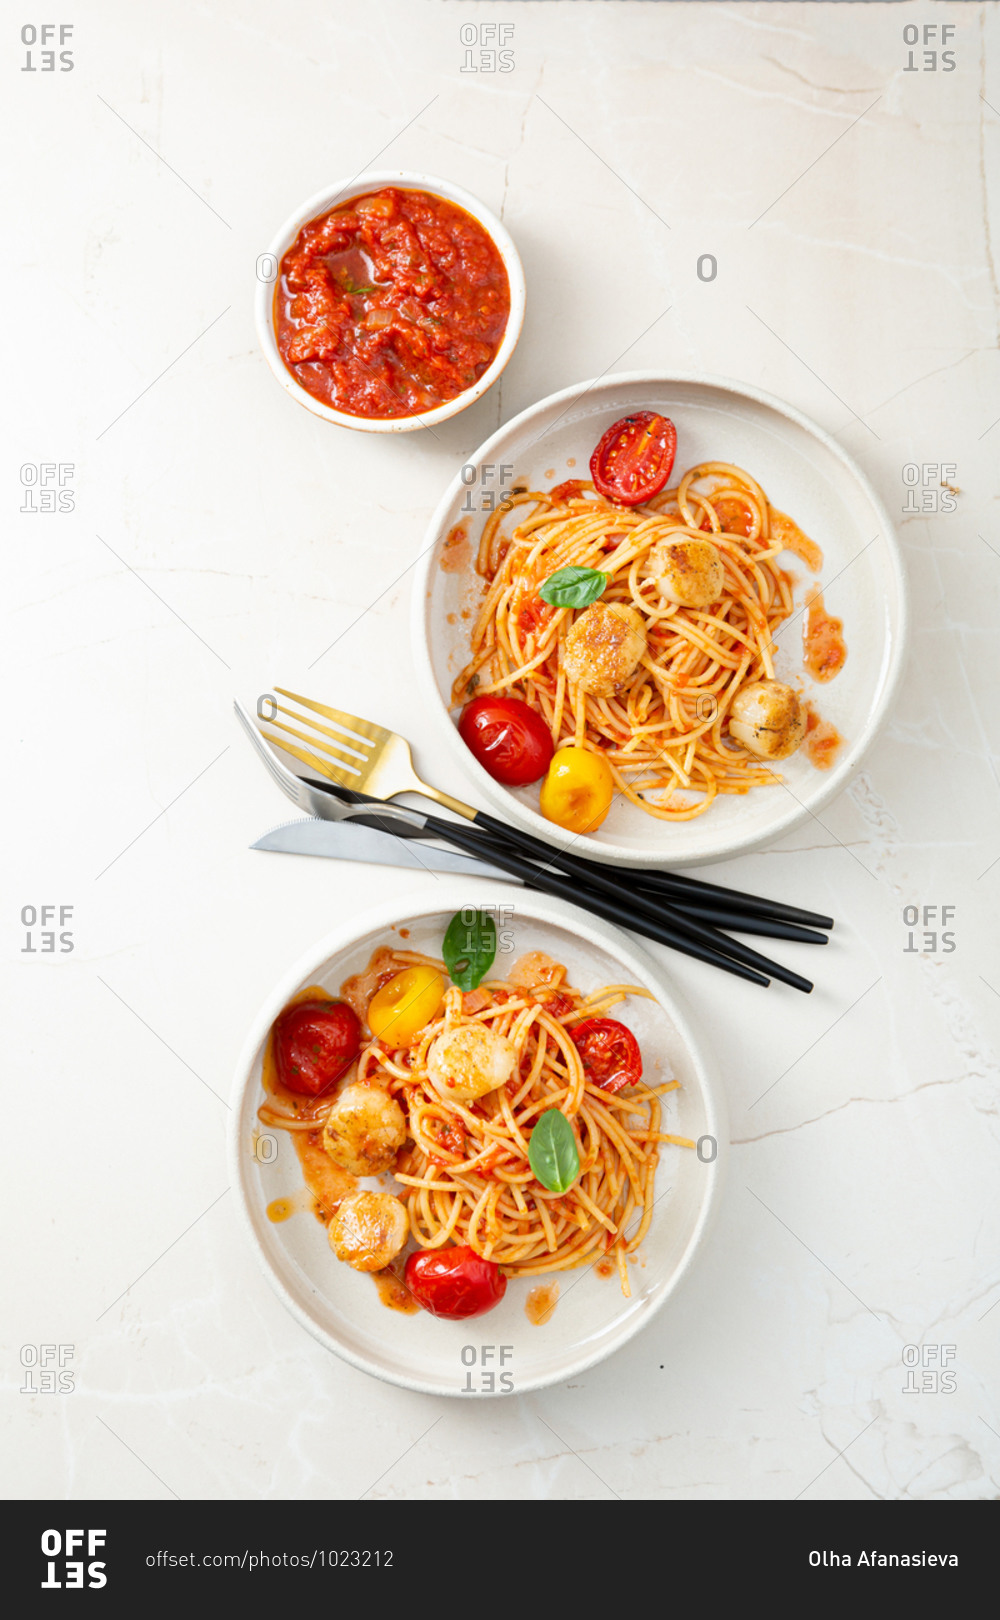 Overhead view of pasta with scallops and red sauce